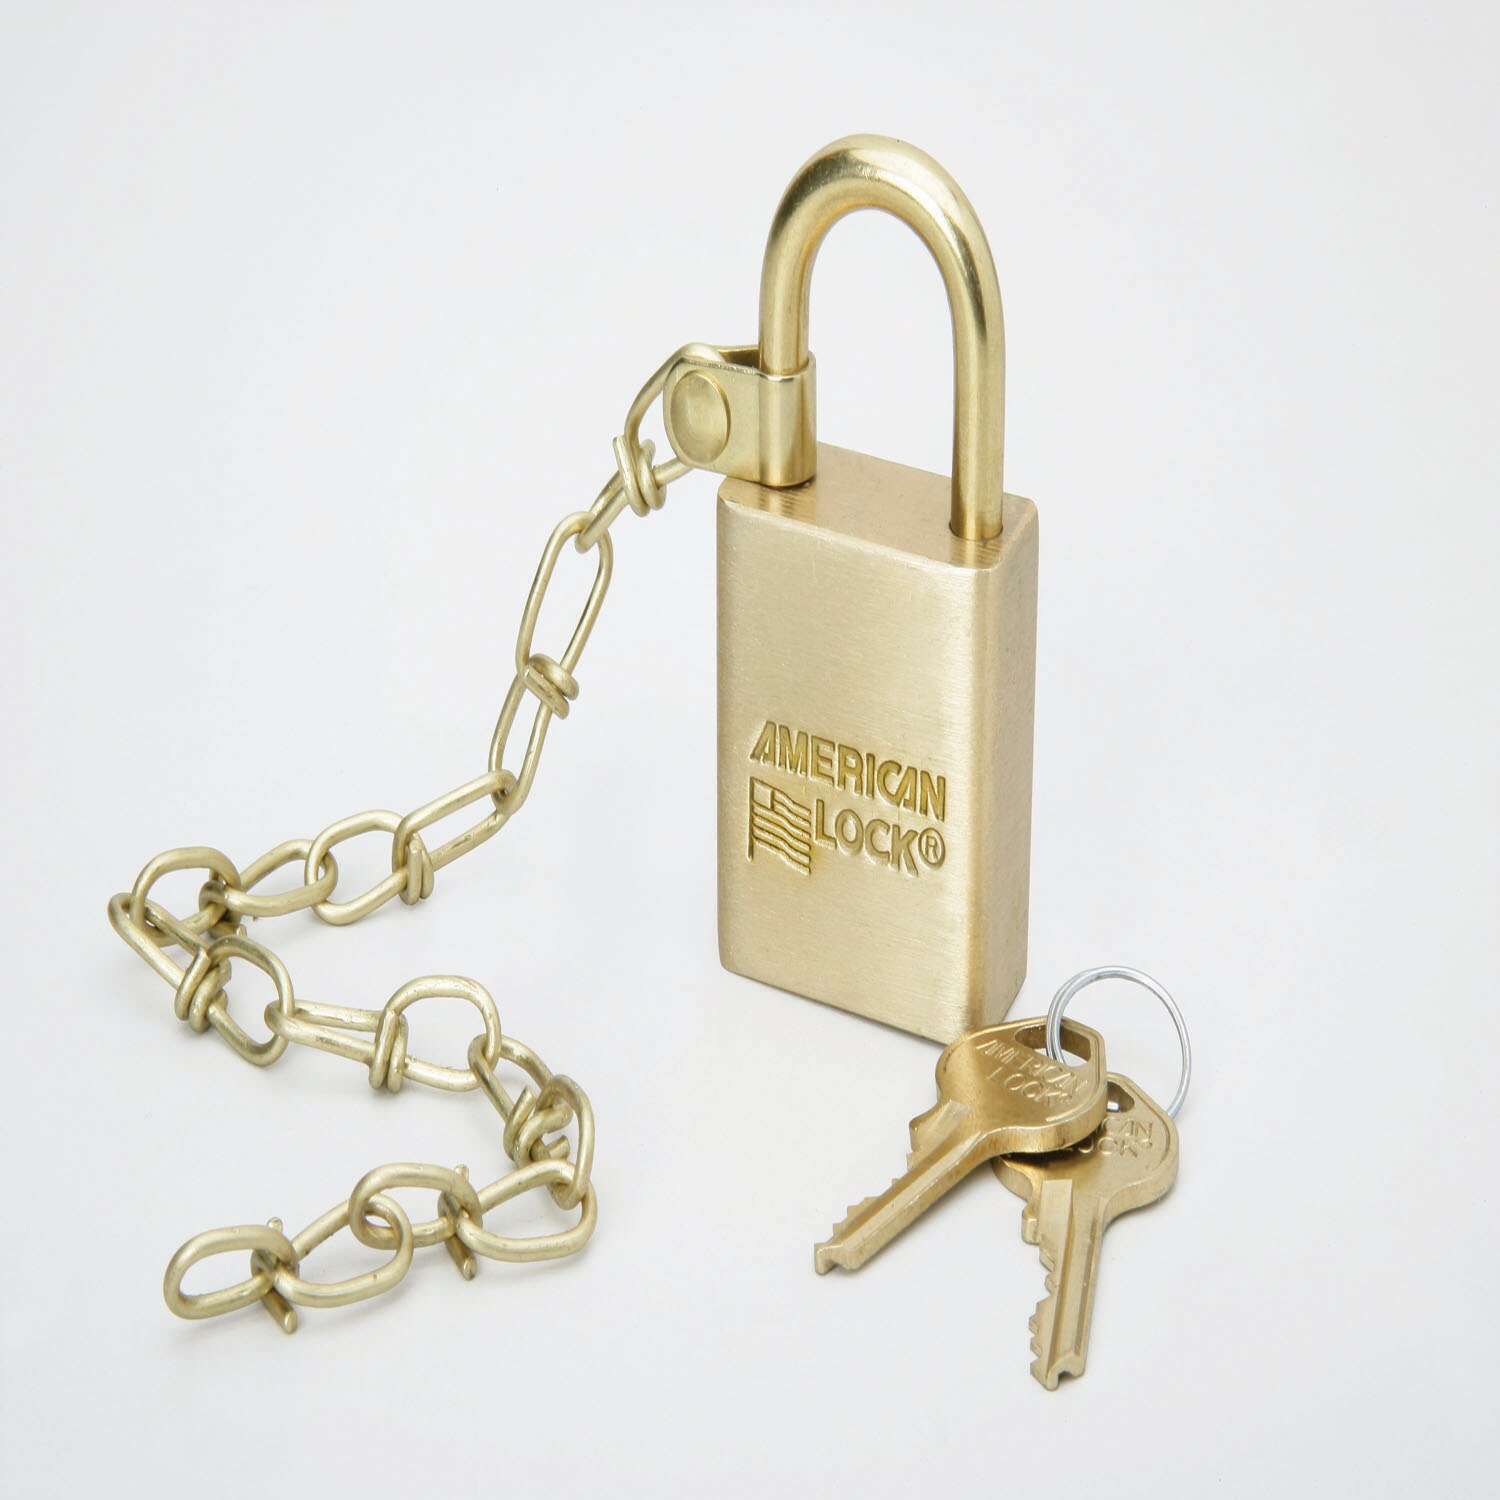 Padlock Set, Solid Case, 1.5" Wide Brass, Grand Master Keyed, w/Chain, 40/SE, 15-5-20L Groupings